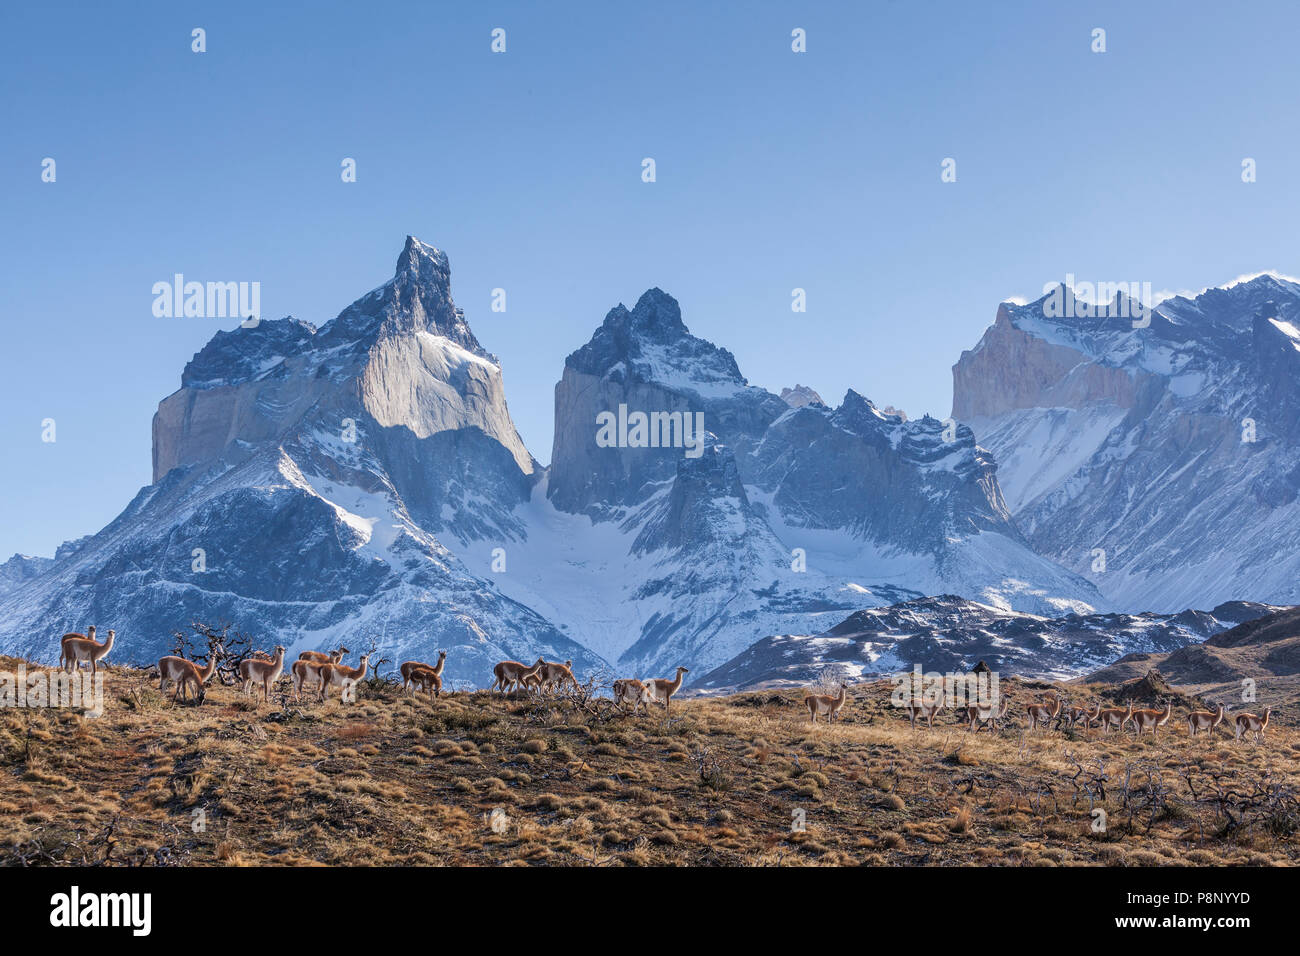 Guanaco herd (Lama guanicoe) with the Paine mountain range in the background Stock Photo